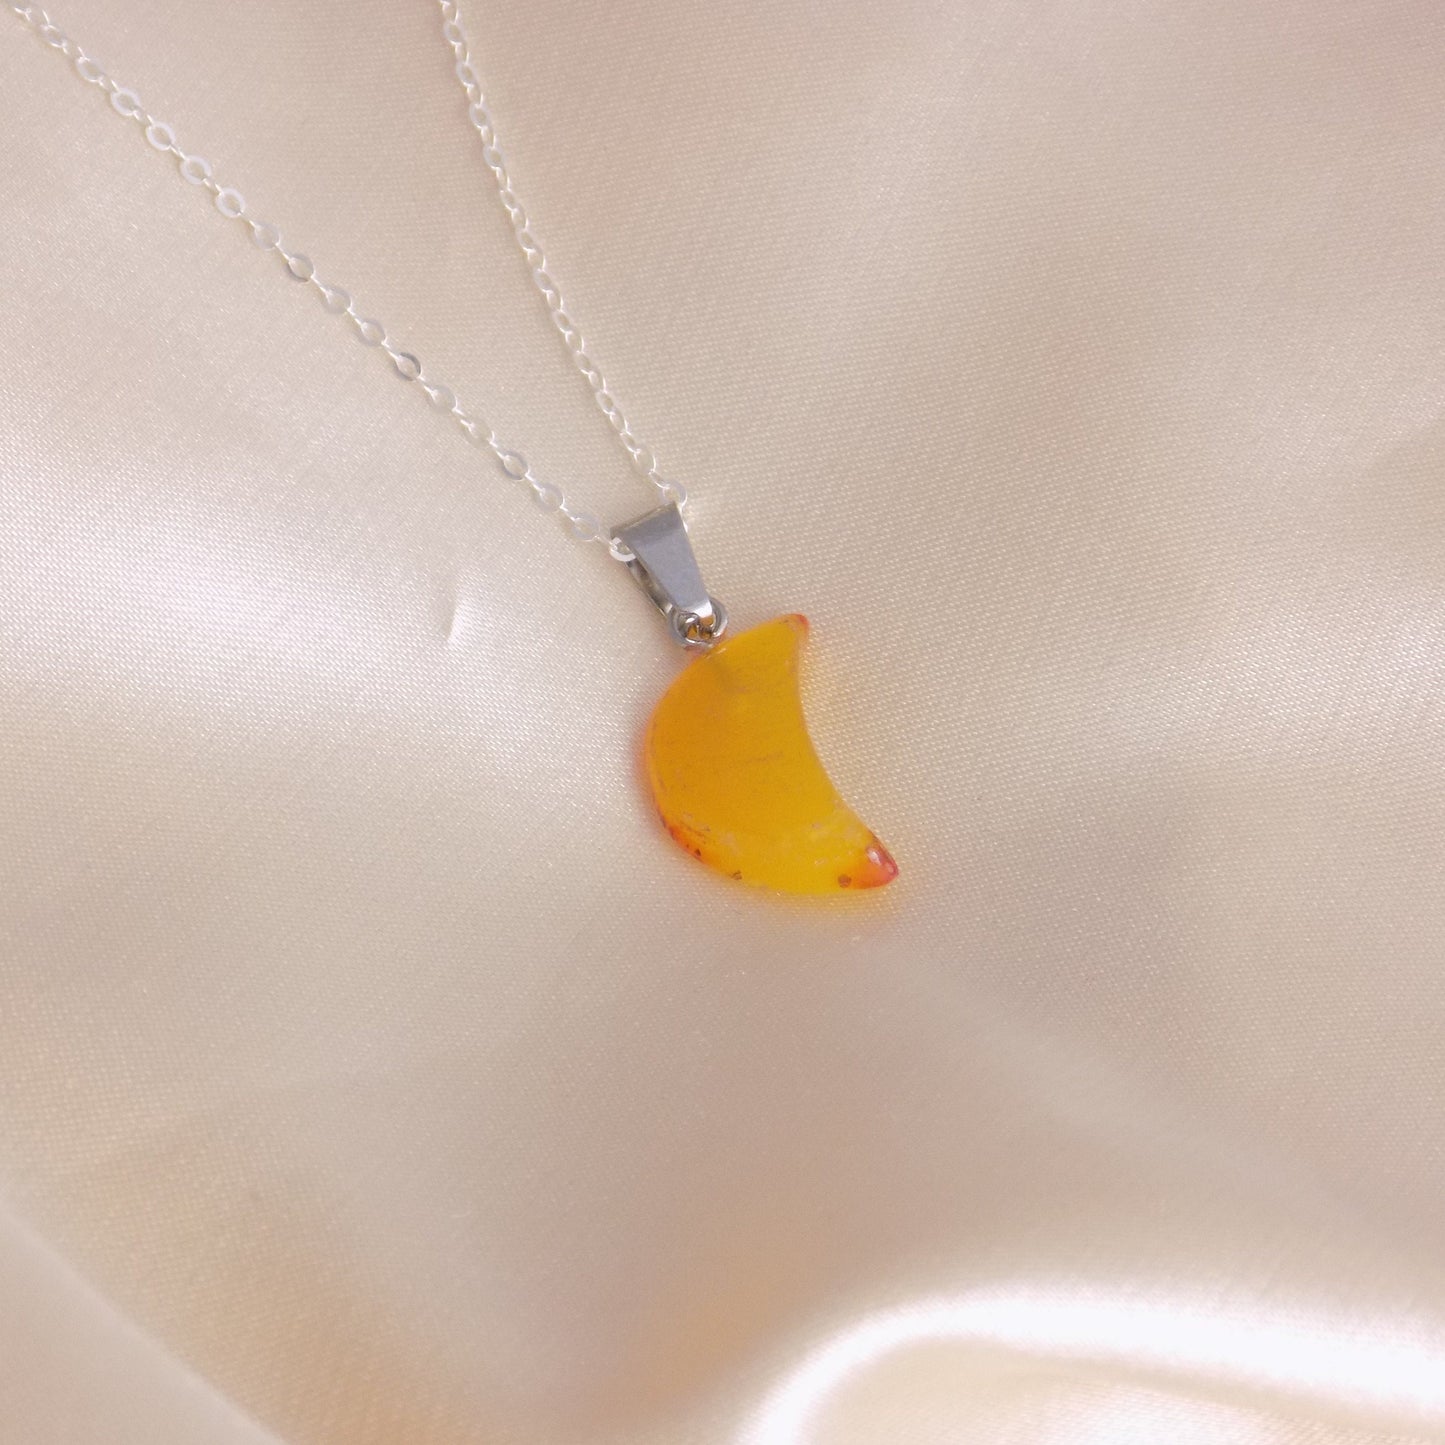 Yellow Agate Moon Necklace Silver - Orange Crystal Moon Pendant - Christmas Gift For Her - M7-132